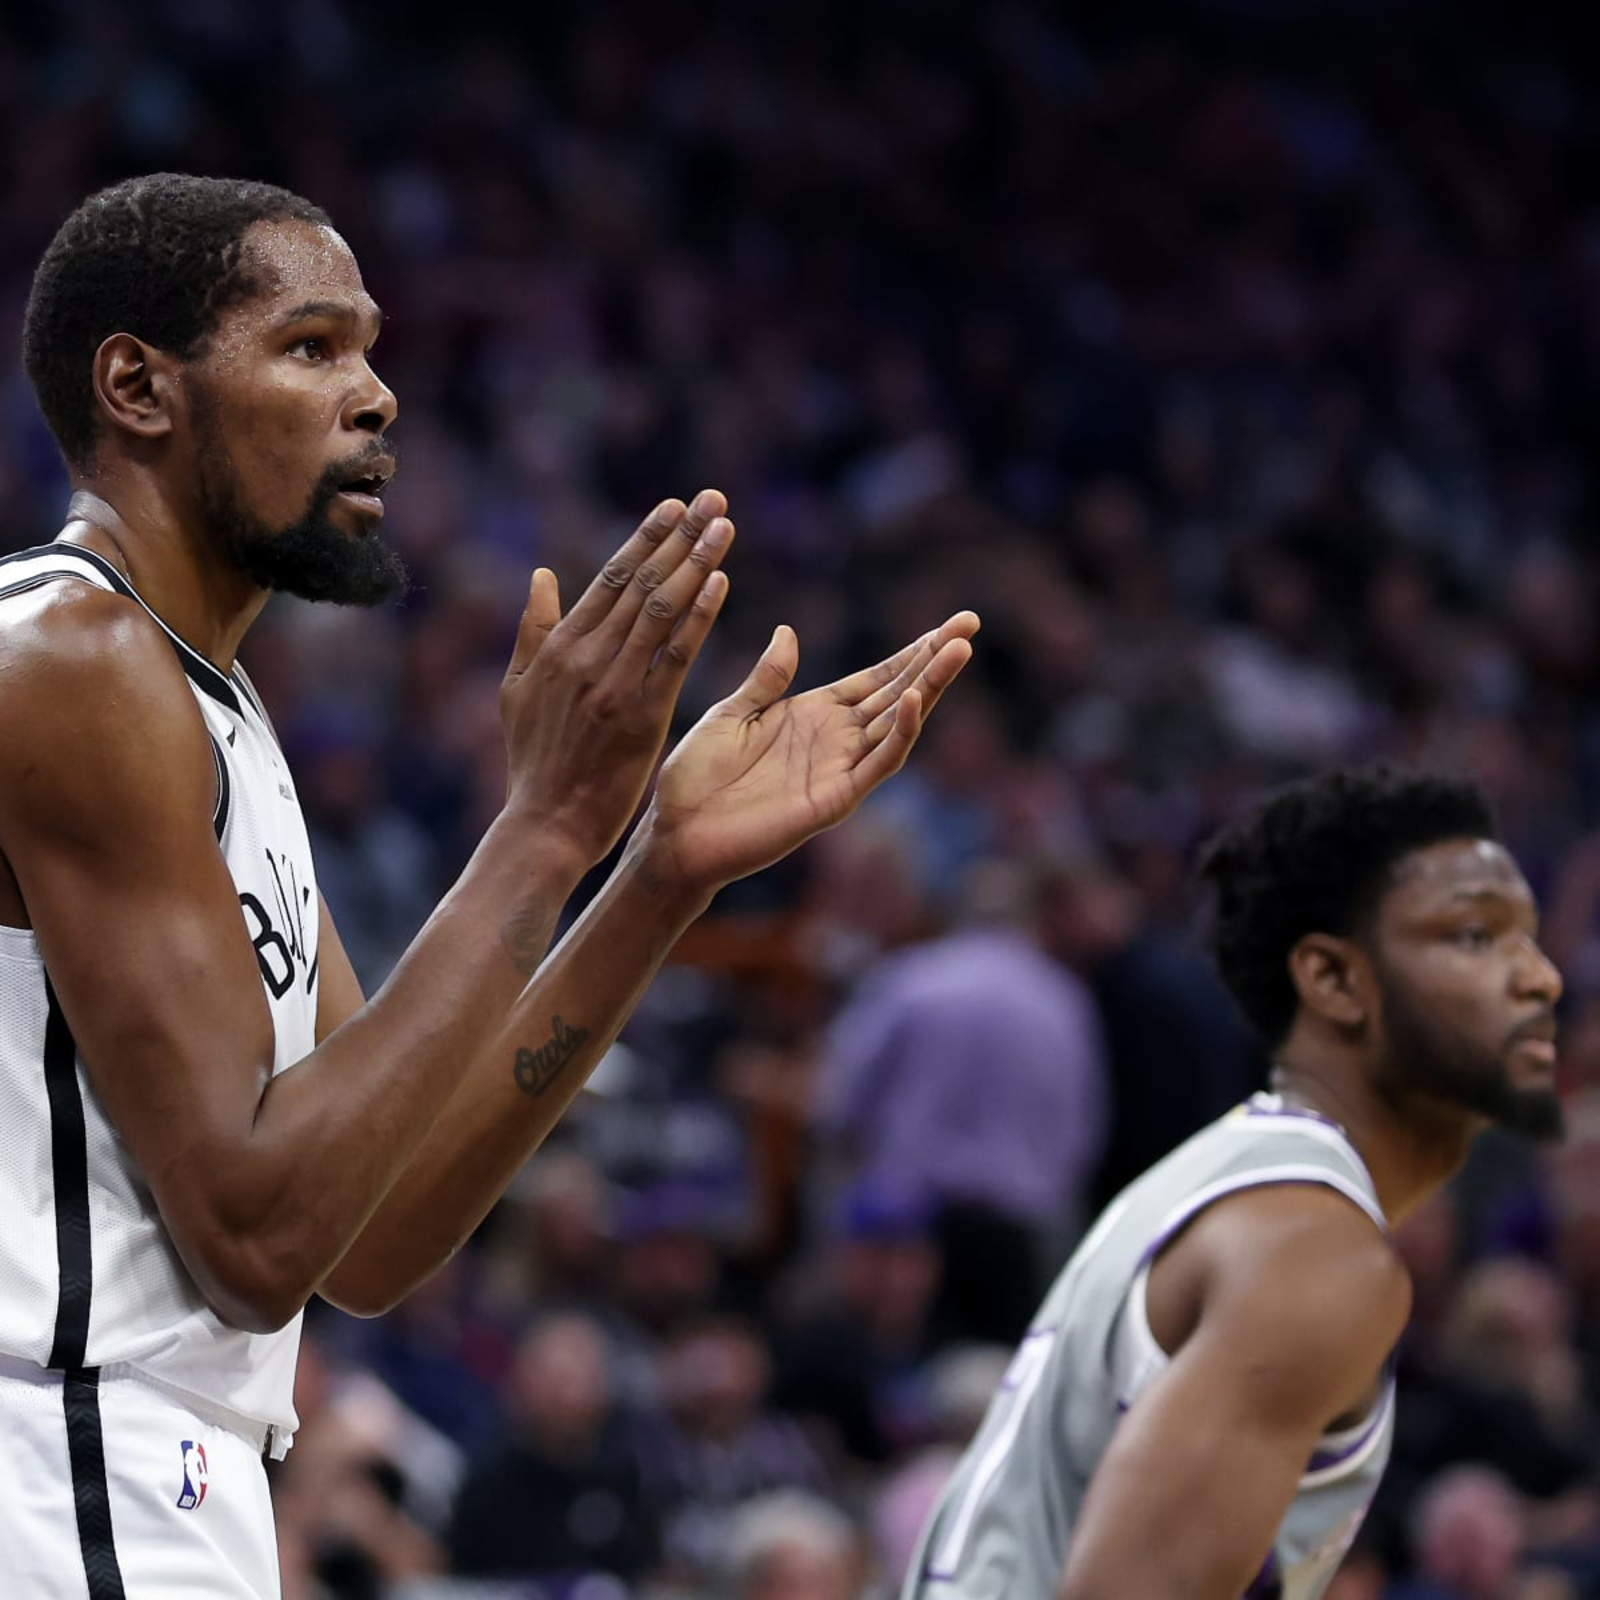 Kevin Durant wants to be 'totally focused' playing defense